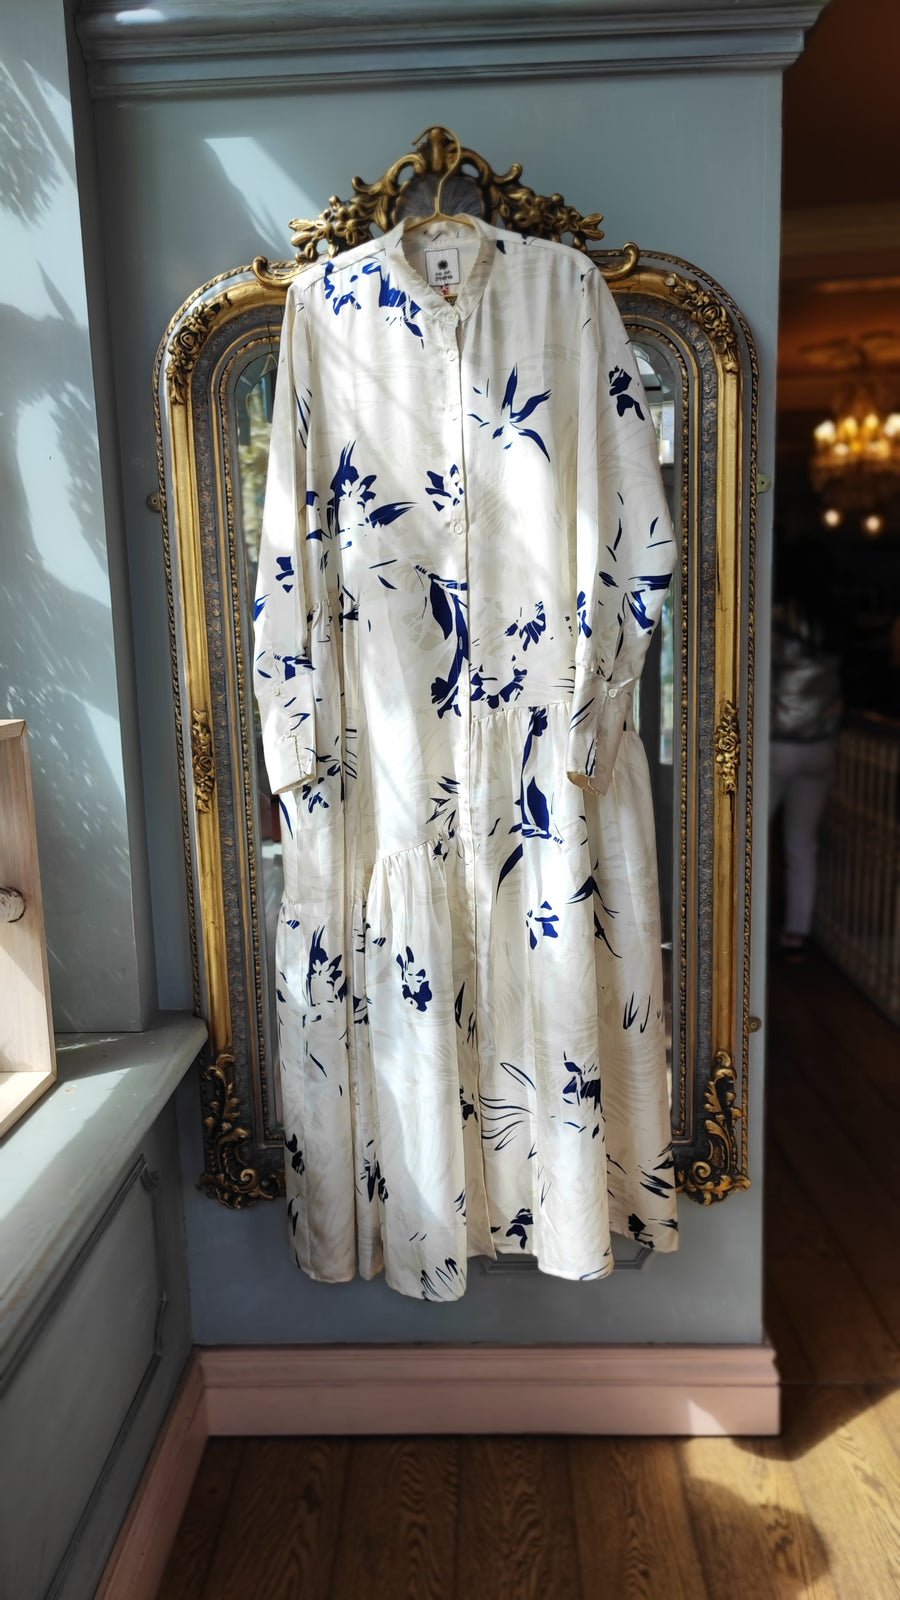 AN AN LONDREE LONG SILK DRESS IN OFF WHITE WITH BLUE FLORAL DESIGN